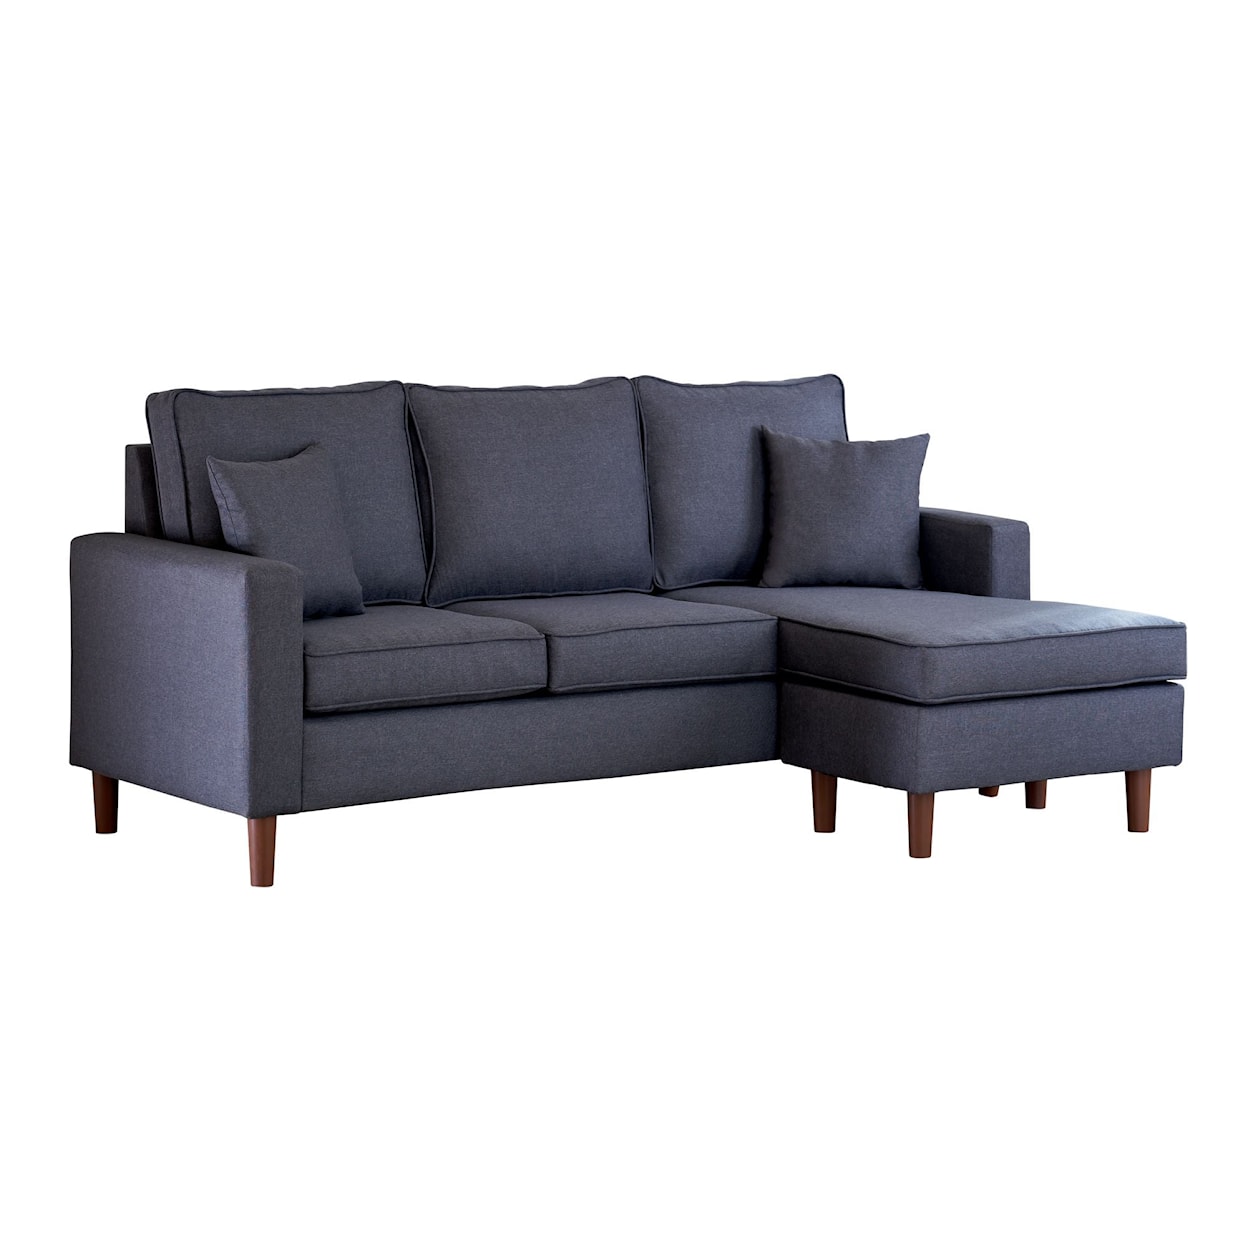 Elements International Volaris Sofa with Chaise